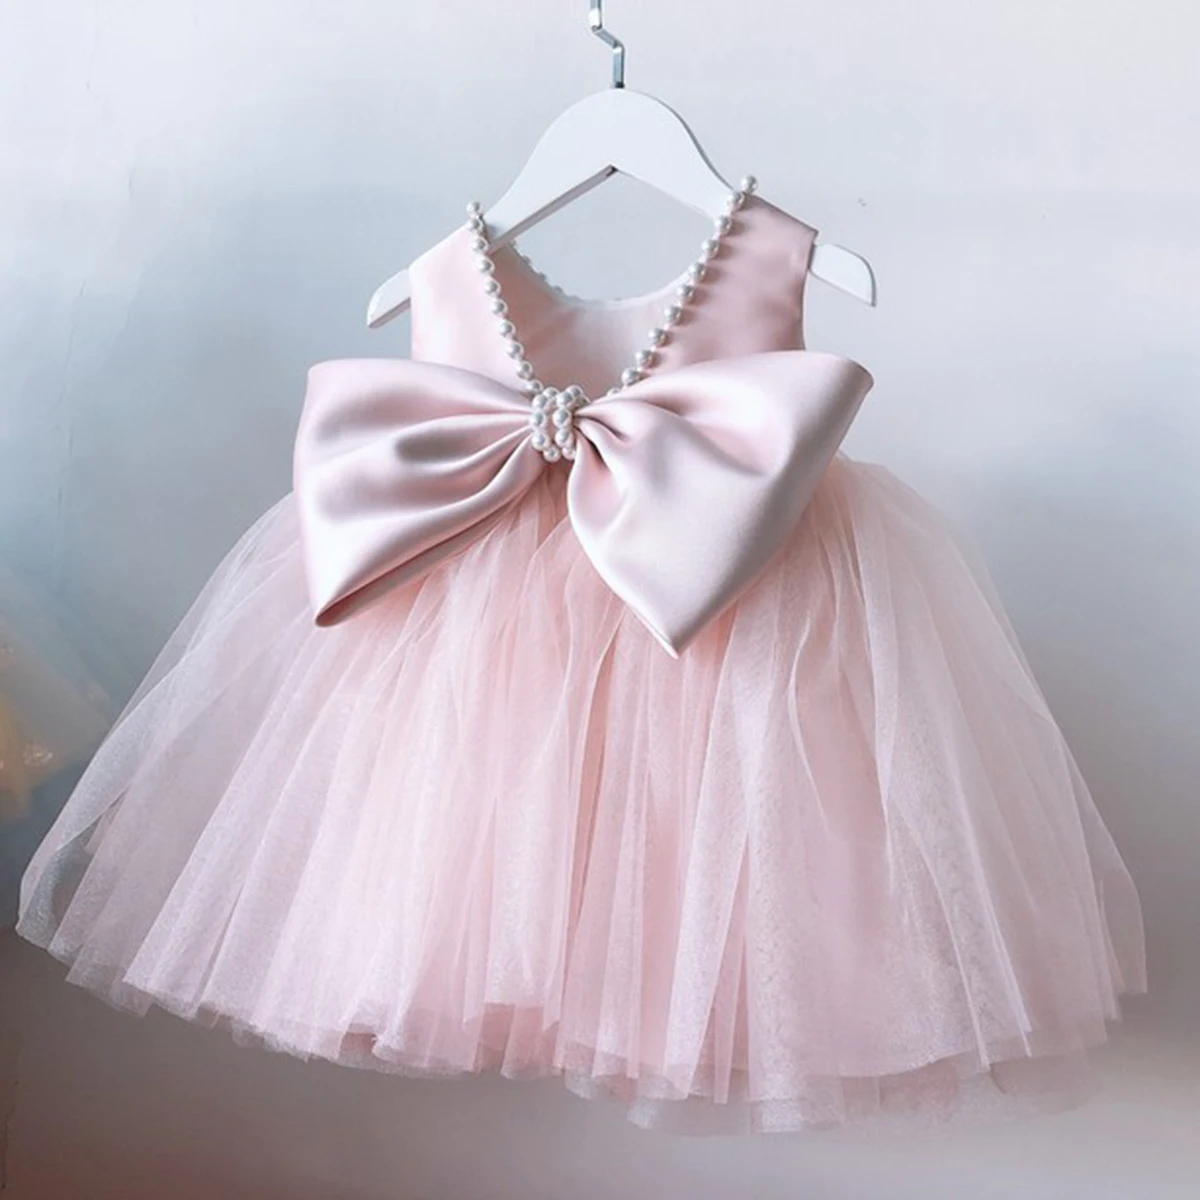 

Girls Dress Pearl Princess For Birthday Party Little Bridesmaid Wedding Girls Dresses Ball Gown Baby Baptism Christening Dresses